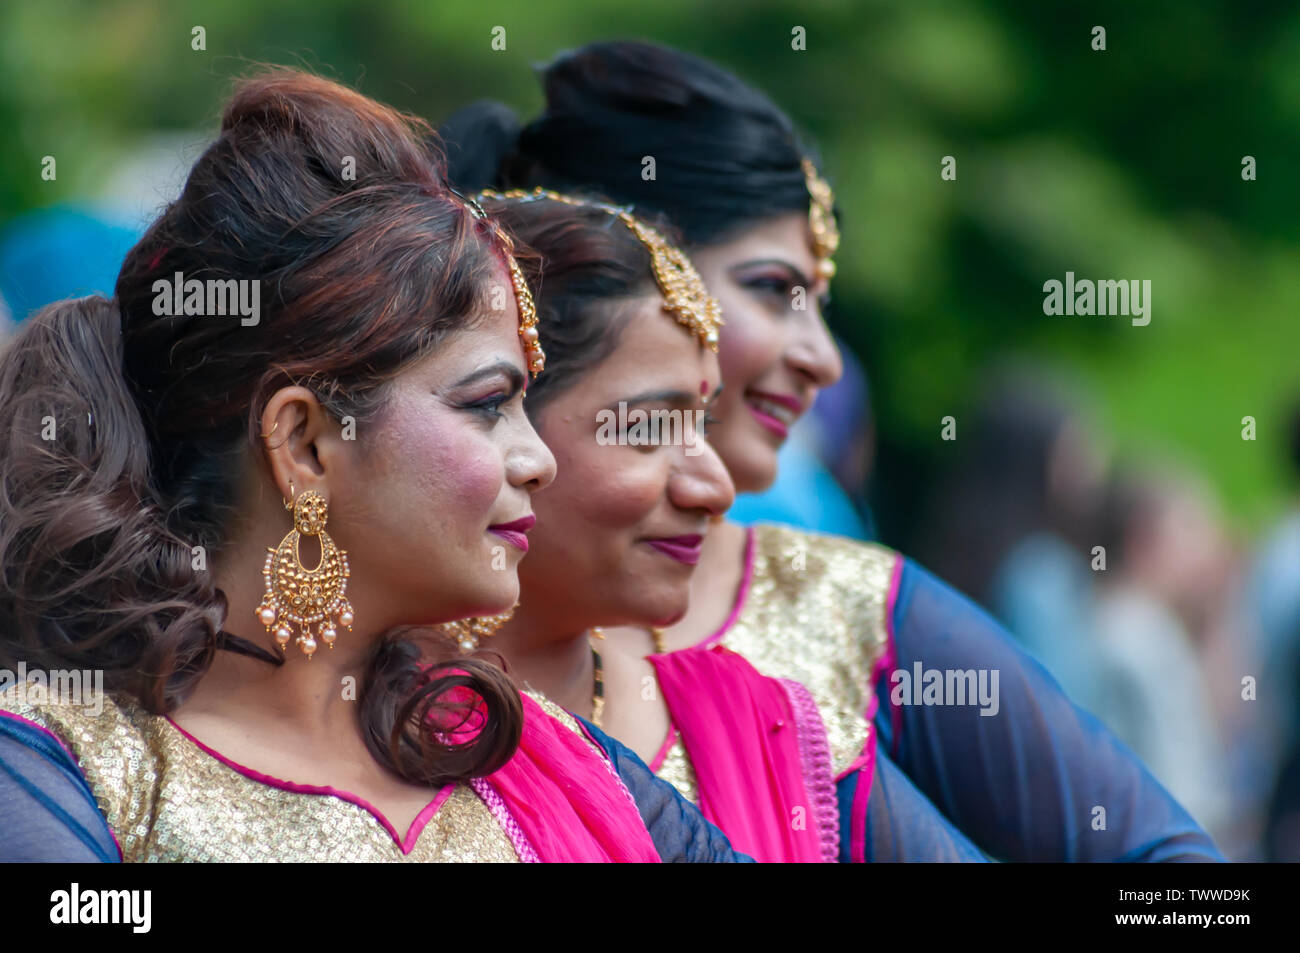 Glasgow, Scotland, UK. 23rd June, 2019. Female performers at Glasgow Mela which is a multicultural festival held in Kelvingrove Park. Credit: Skully/Alamy Live News Stock Photo